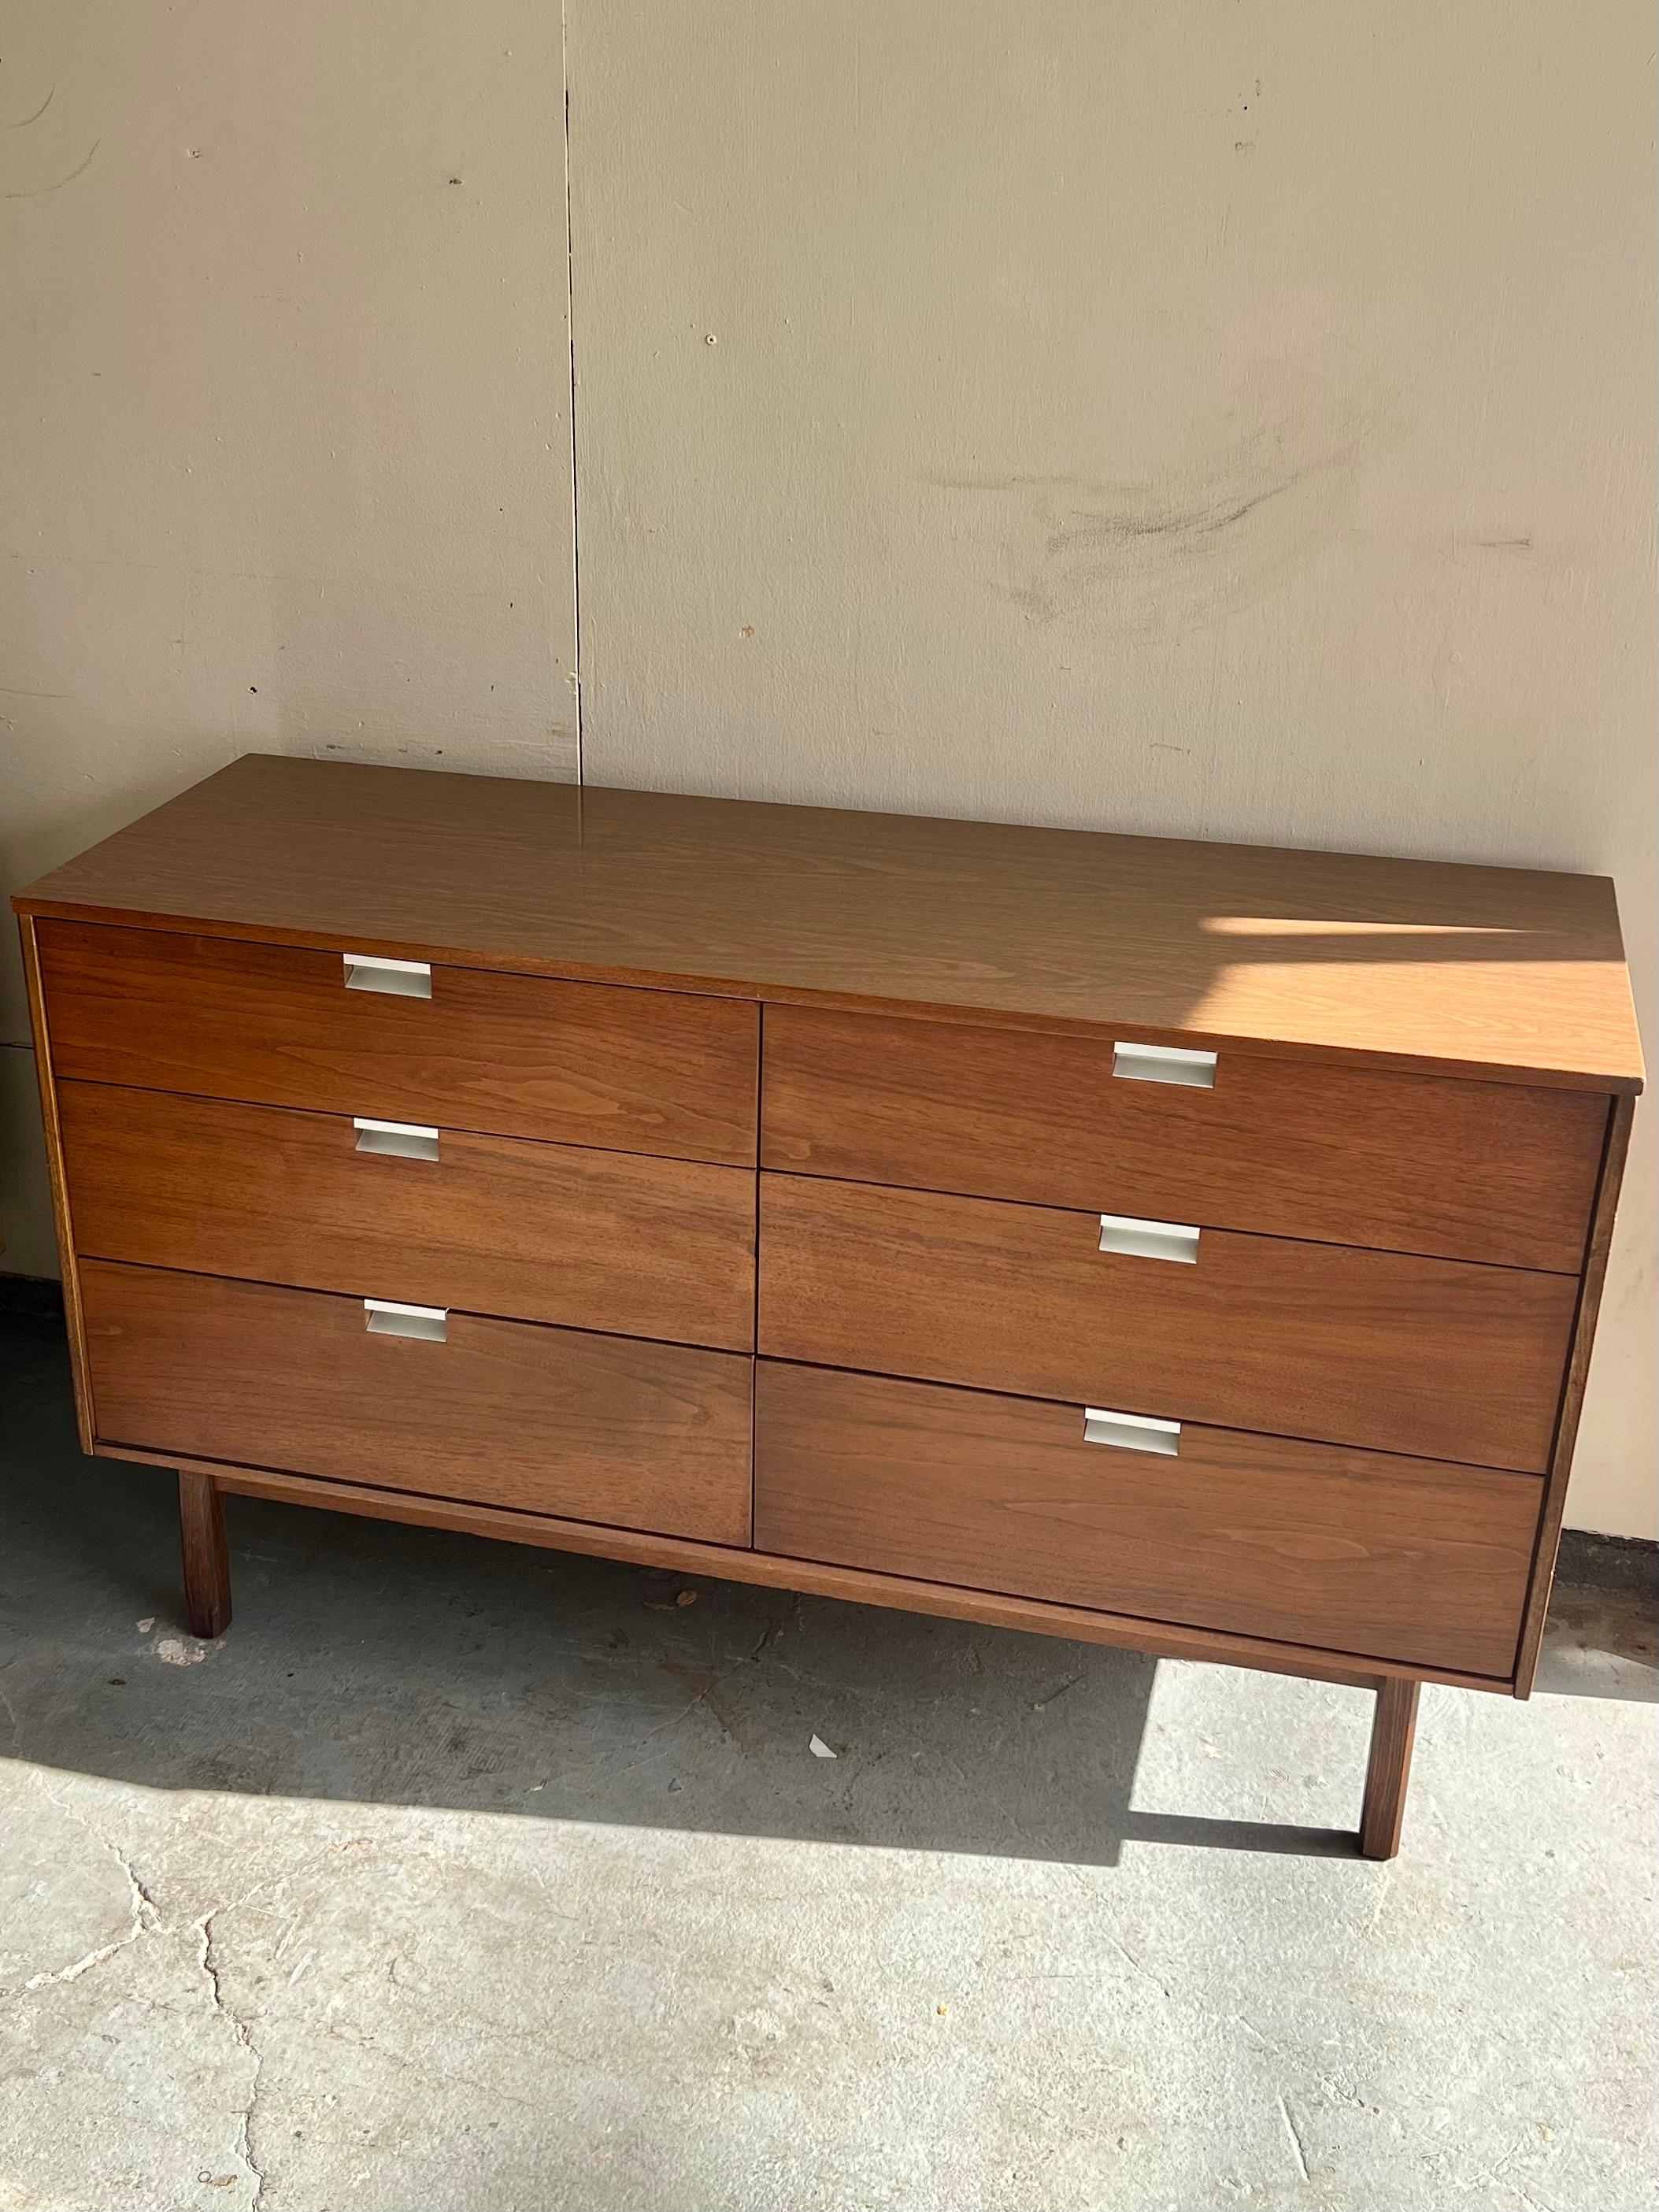 A sleek compact lowboy feating six drawers with recessed stainless pulls reminiscent of the designs of George Nelson. All drawers slide smoothly on wooden tracks. Minimal wear. Two small walnut veneer chips have been filled- please see photos. Some